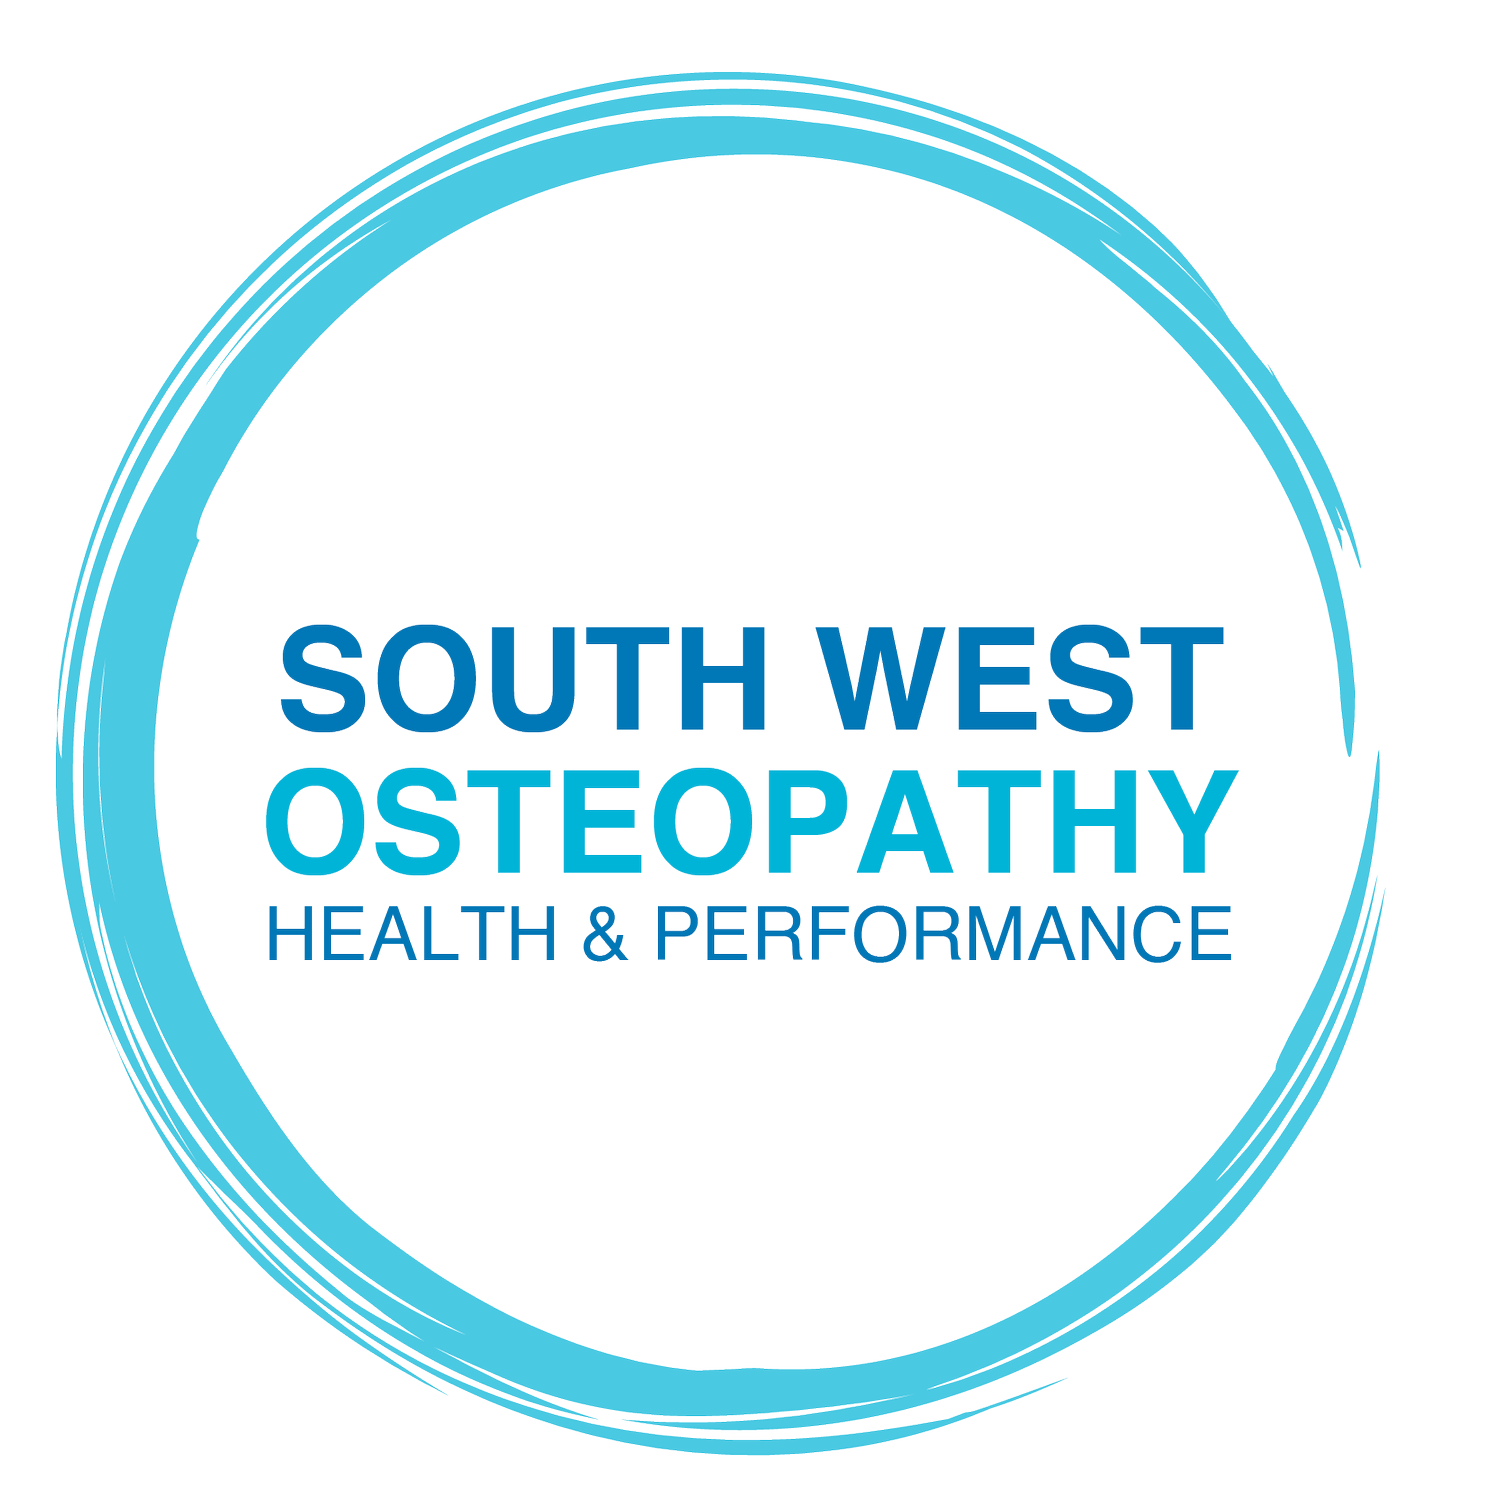 South West Osteopathy